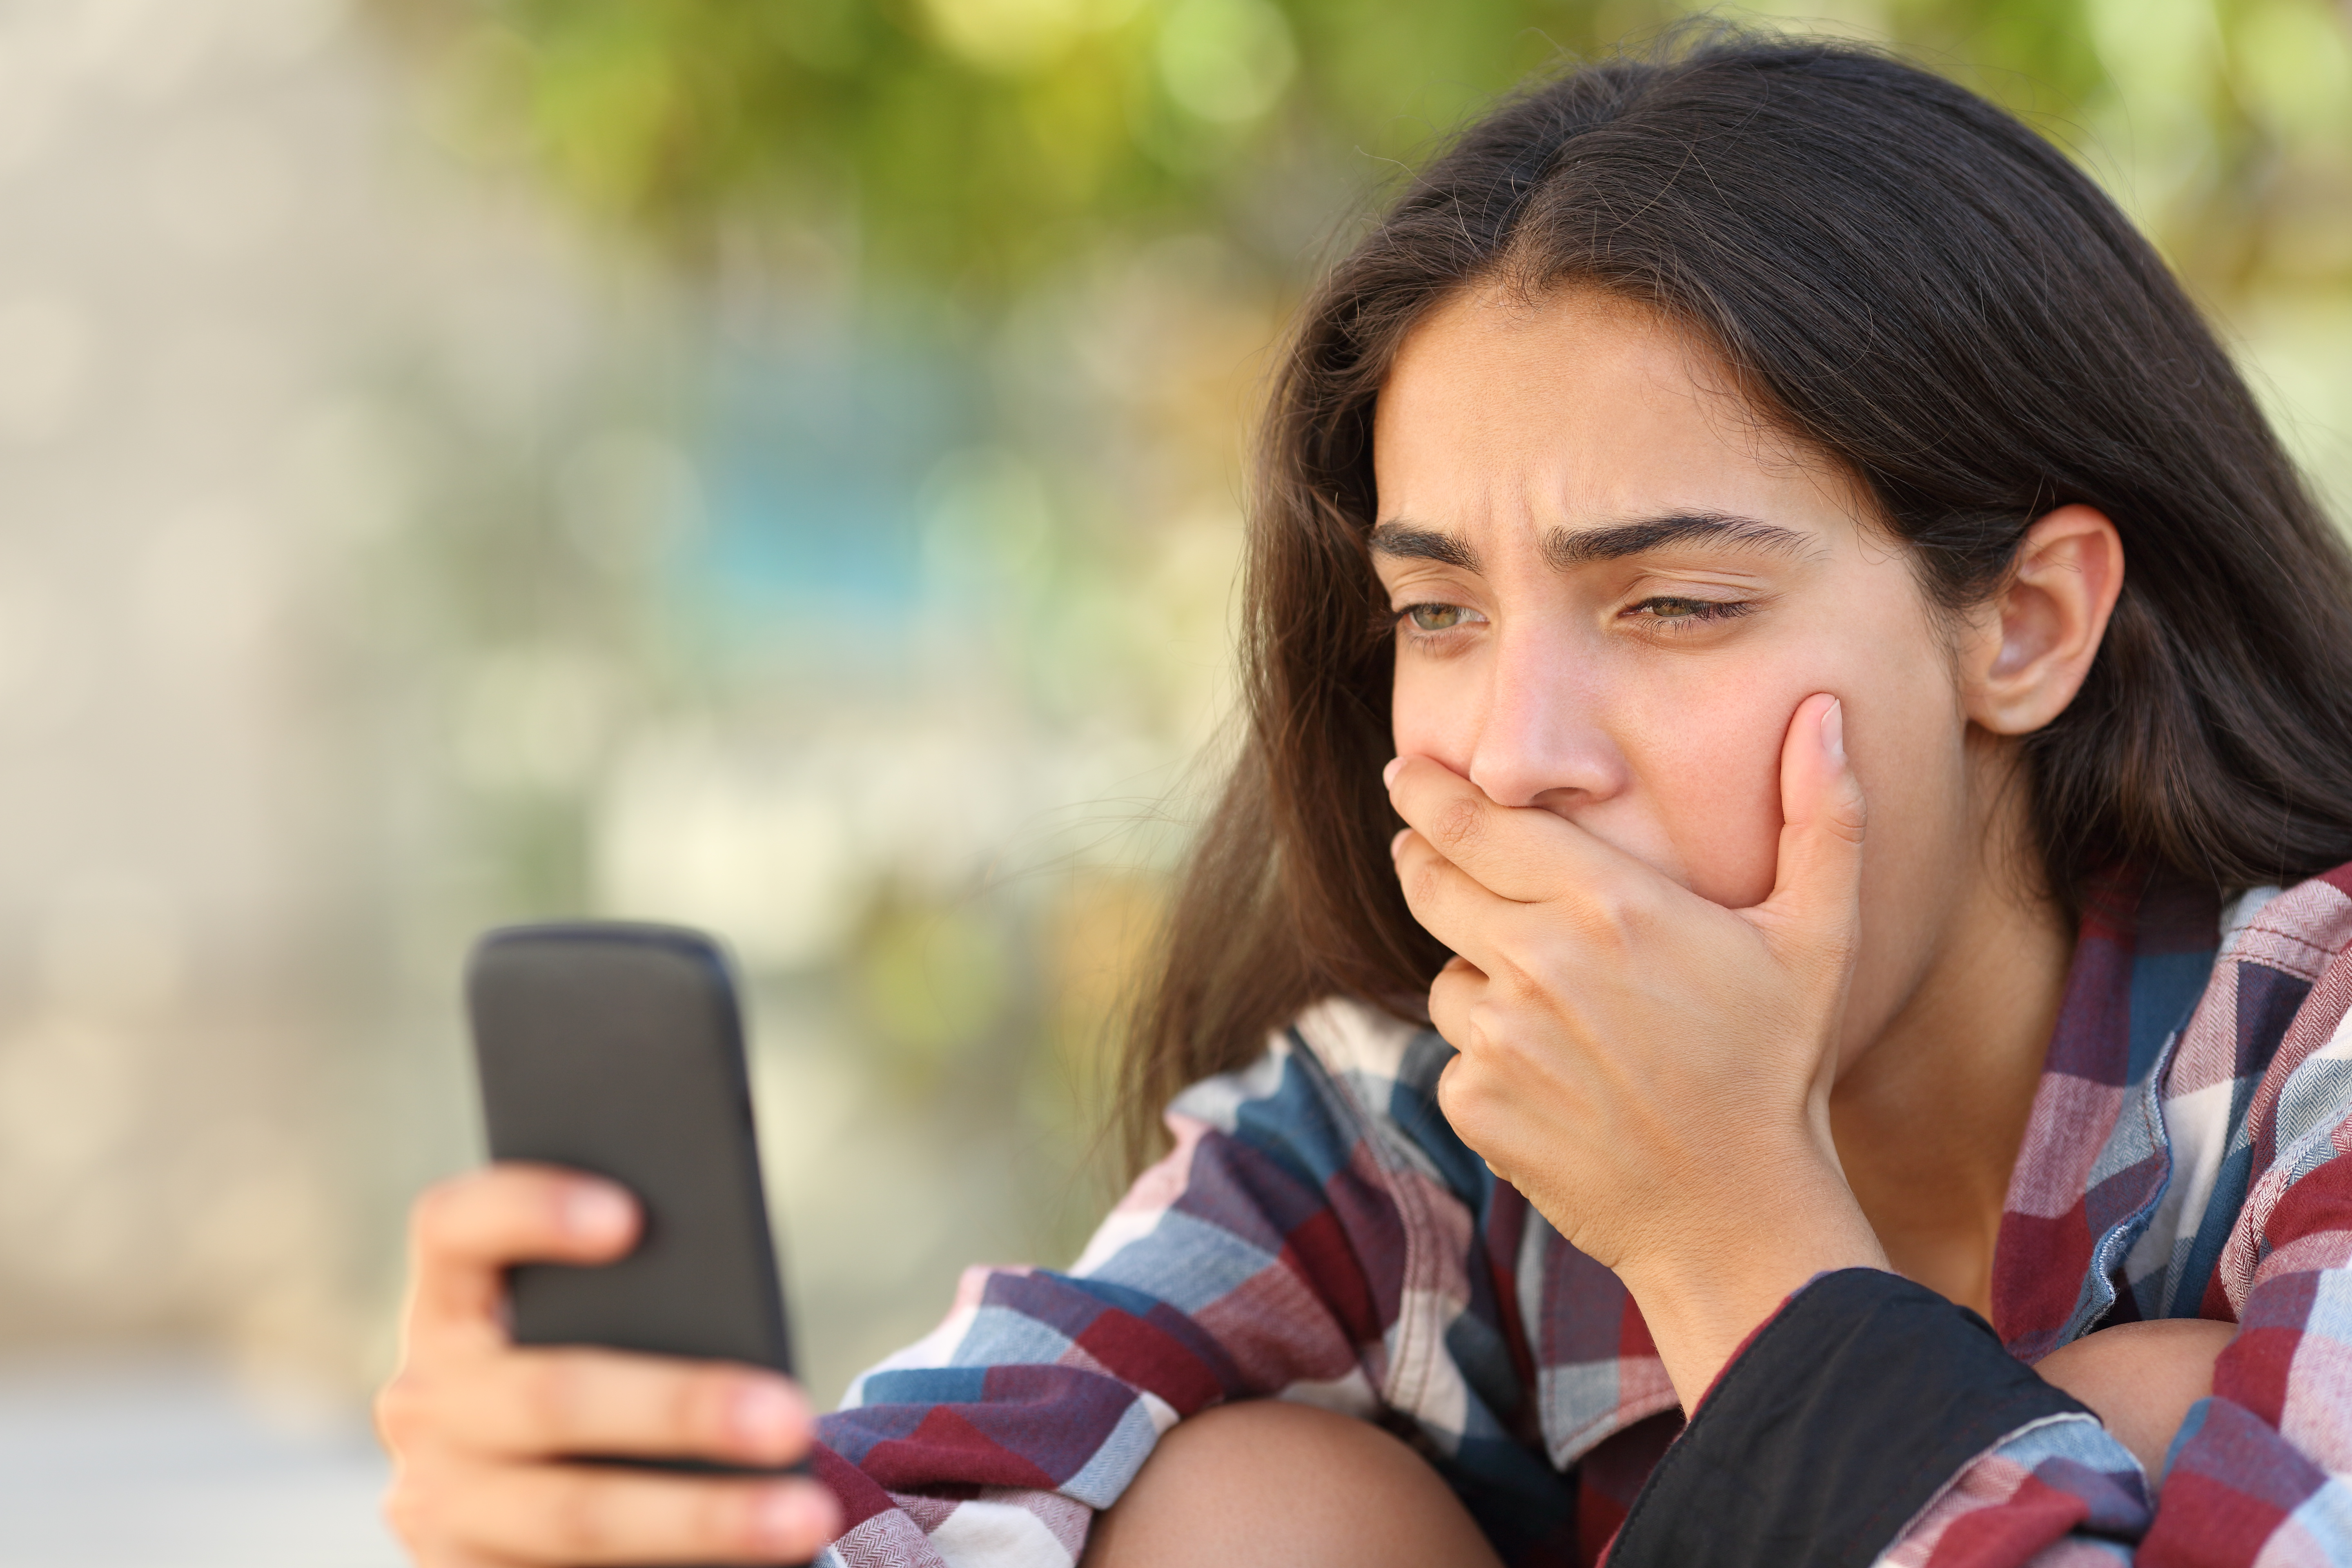 Worried teenager girl looking at her smart phone in a park with an unfocused background